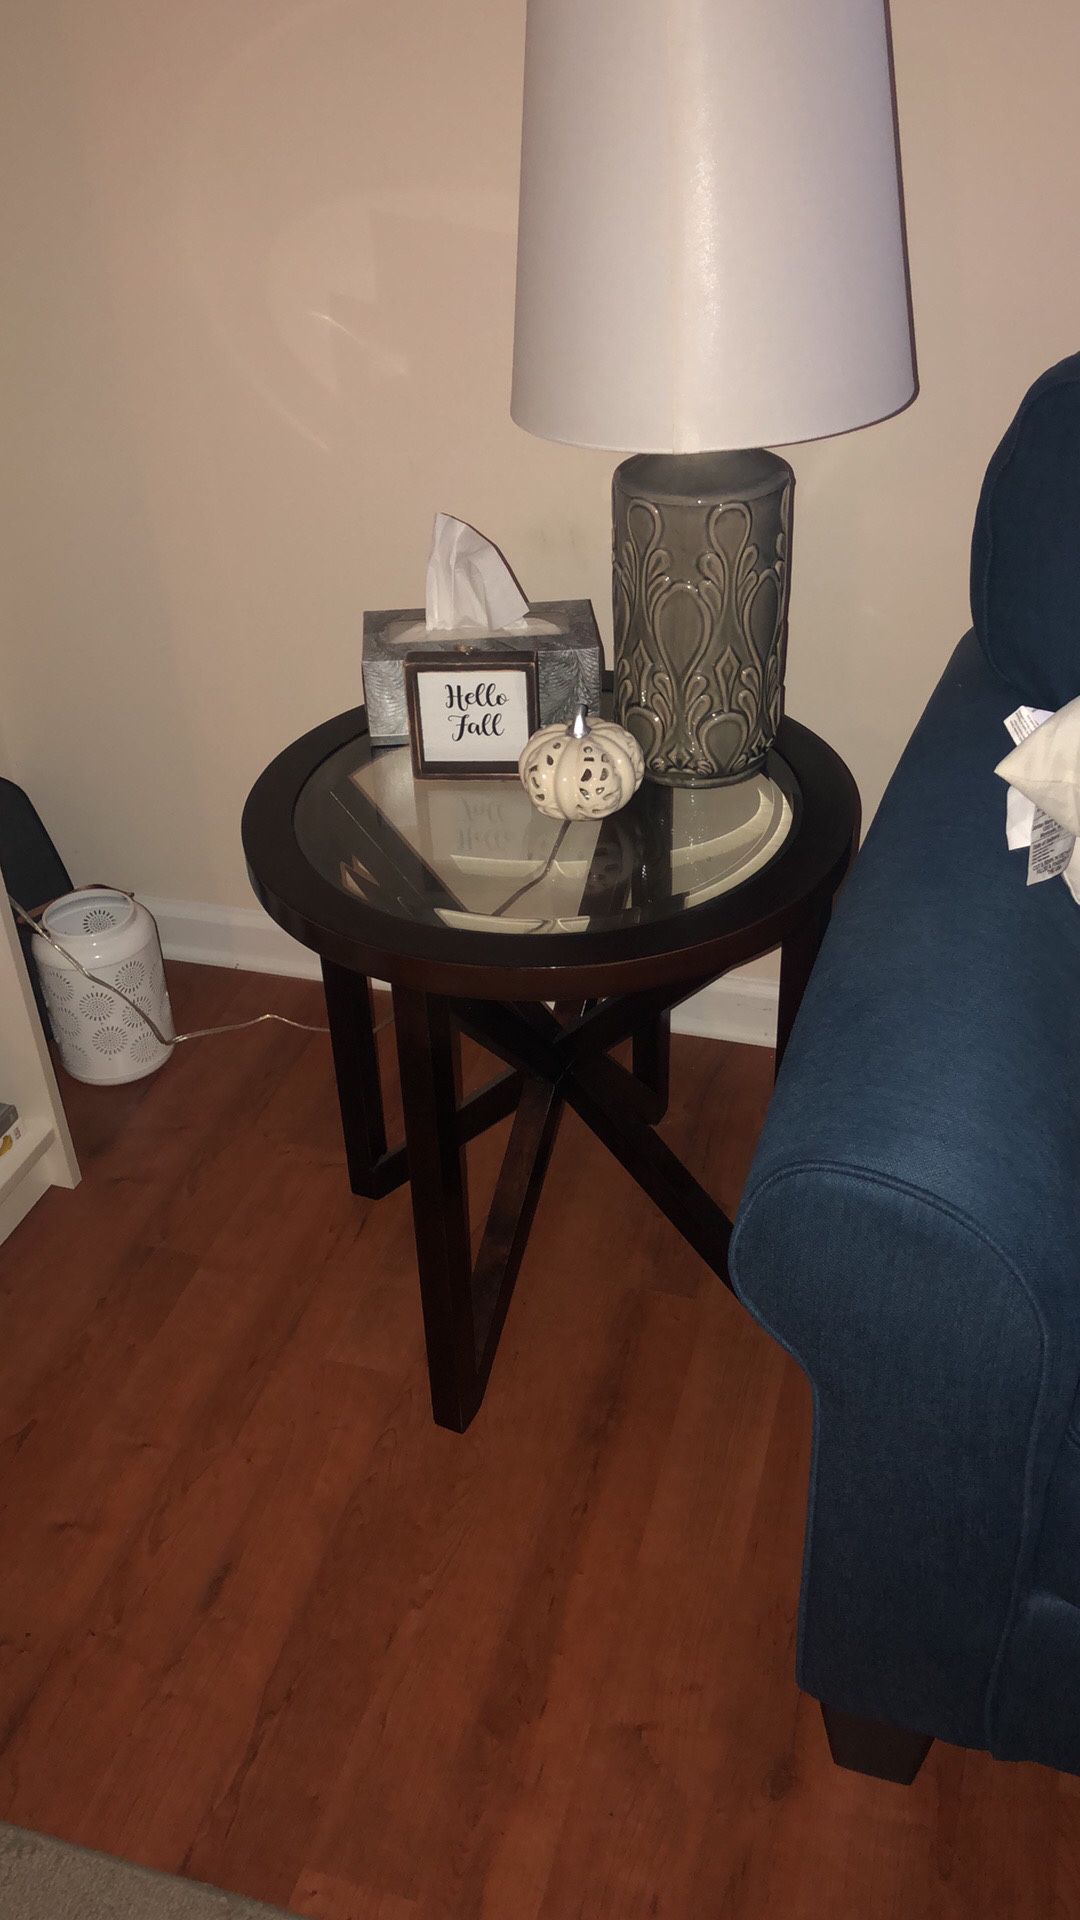 Coffee table and end tables